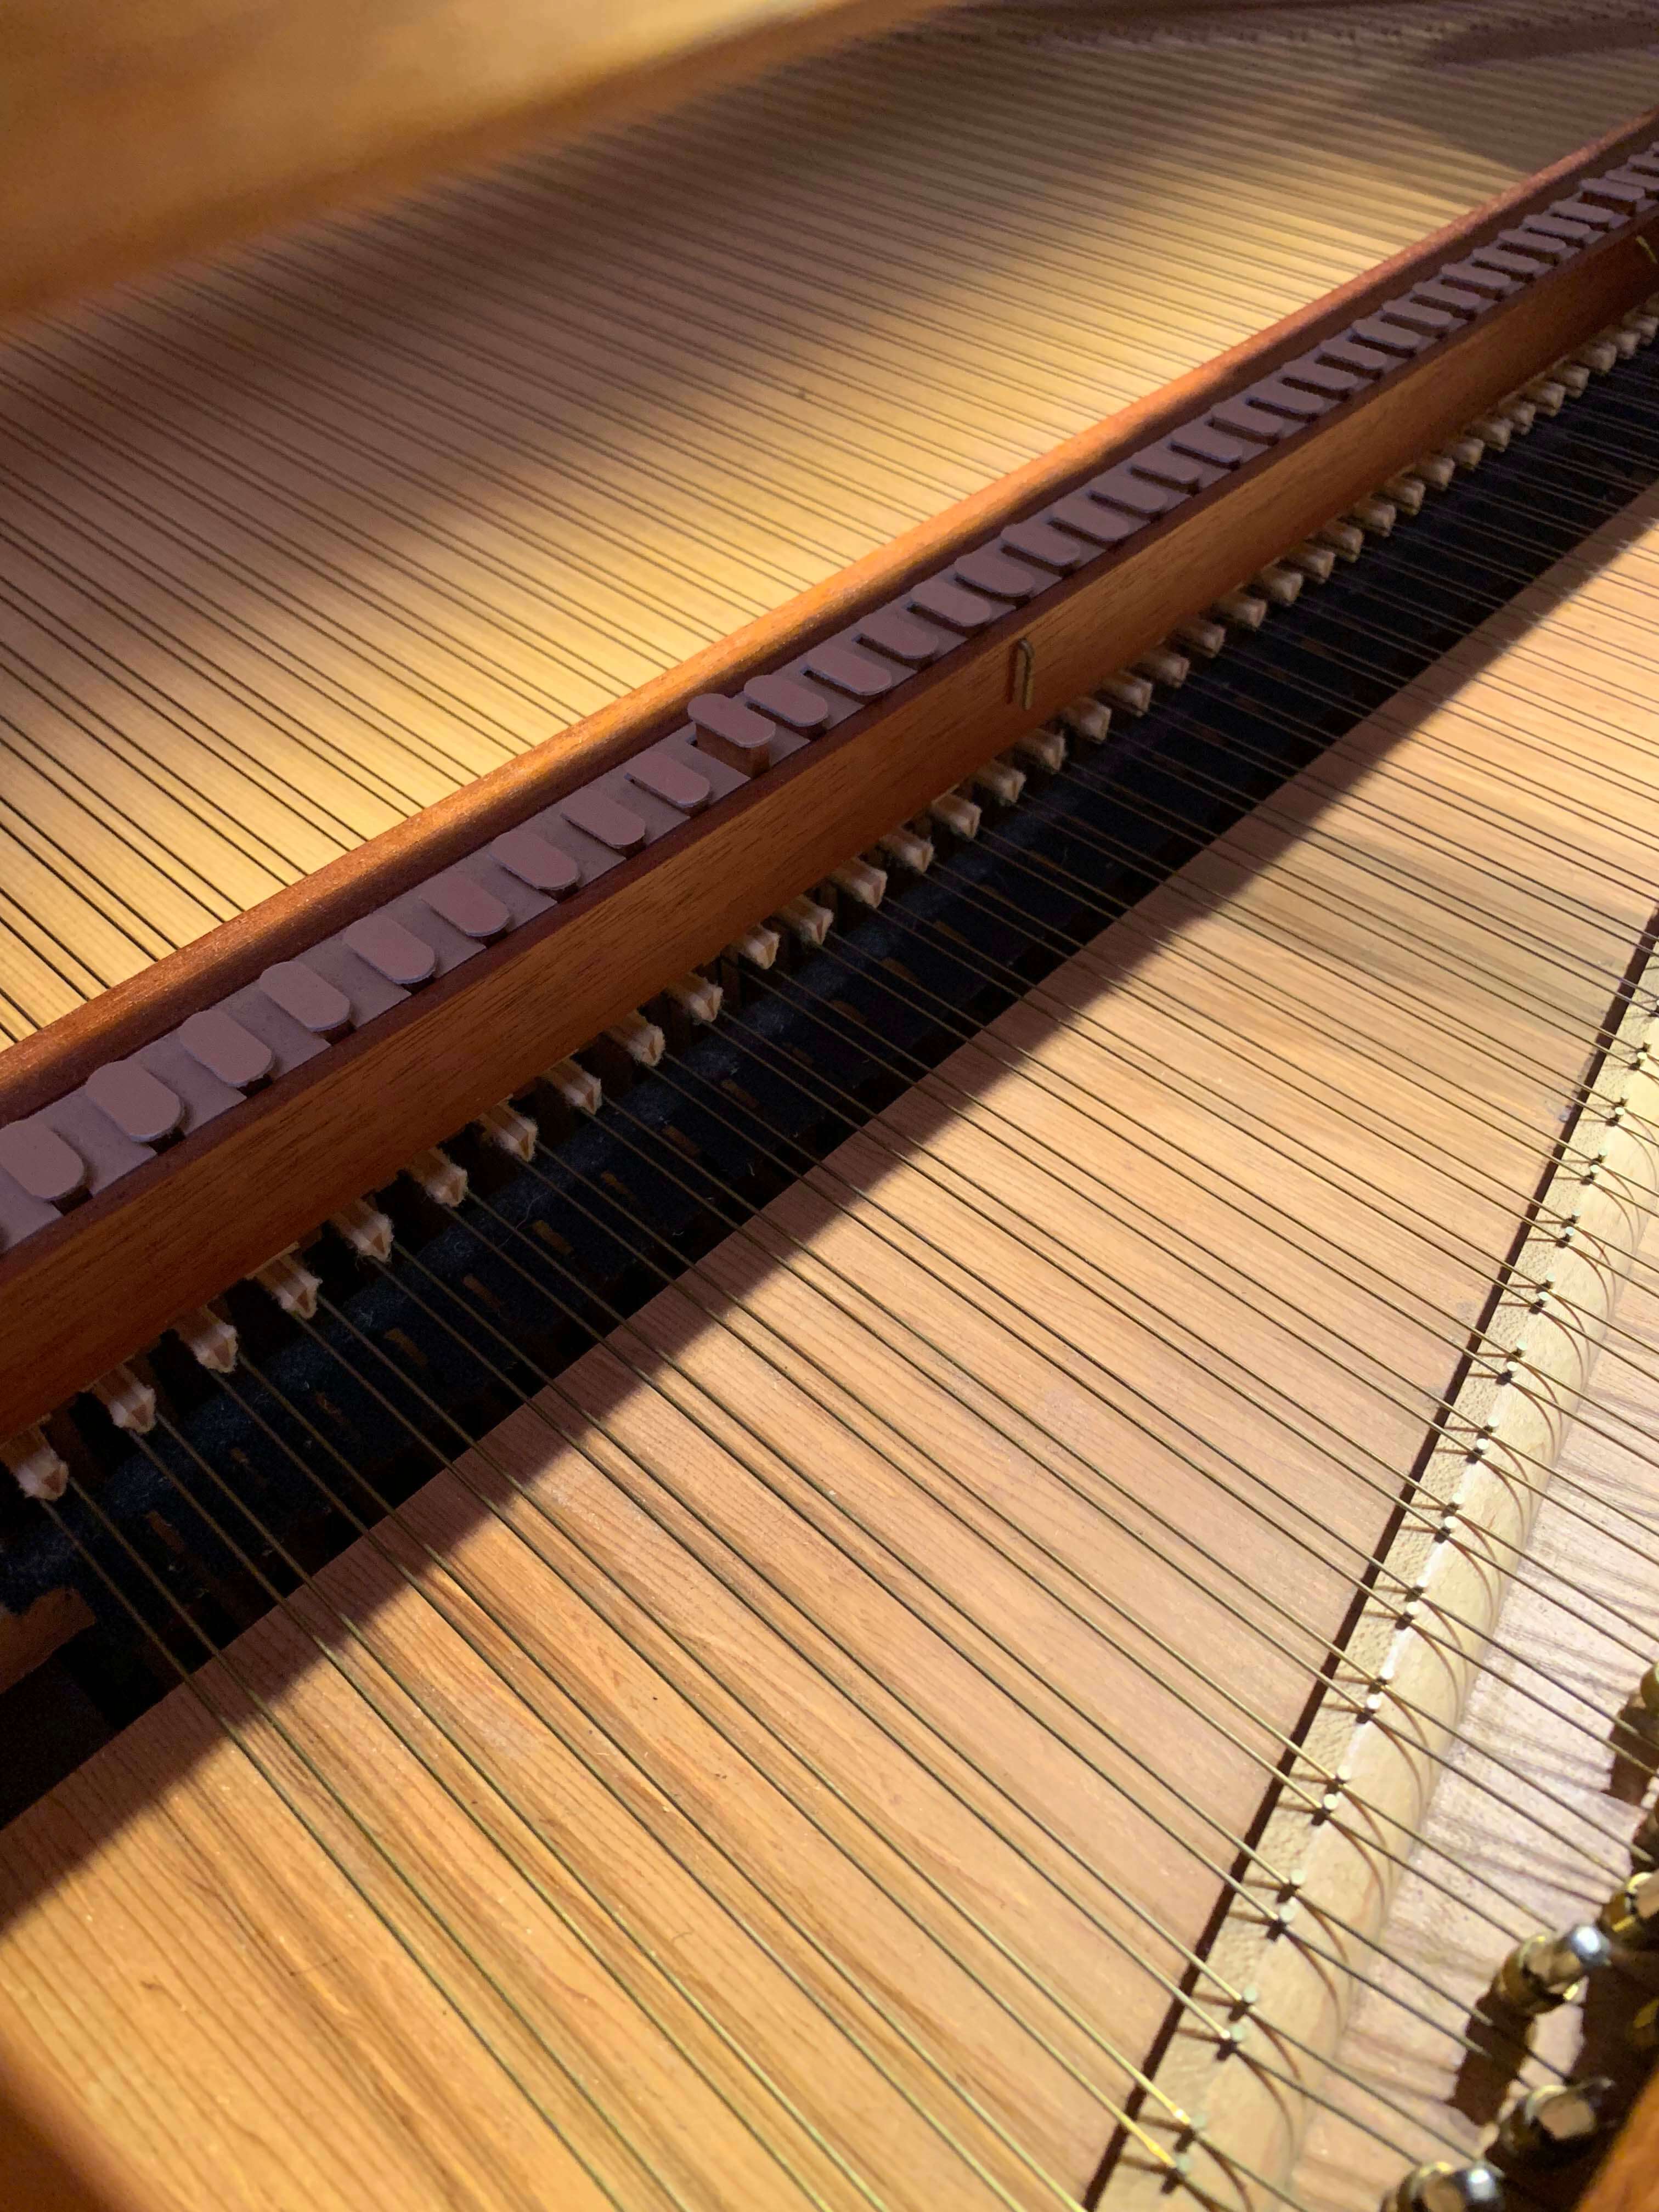 The action of a fortepiano is very similar to that of a modern piano with hammers and dampers.